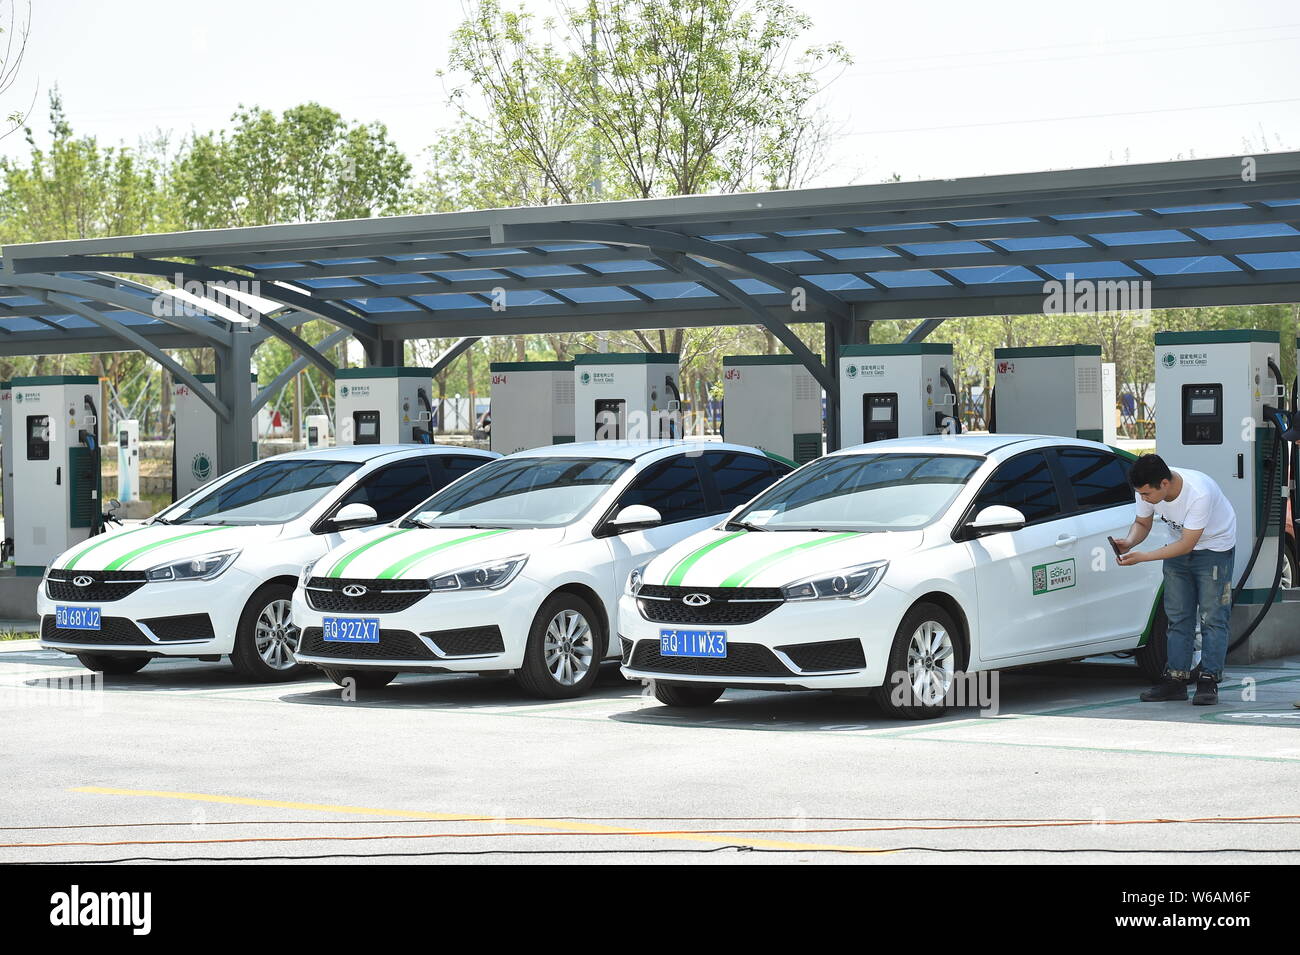 Chery electric vehicles (EVs) are being charged at a charging station in the Xiong'an Citizen Service Center in Rongcheng county, one part of the new Stock Photo